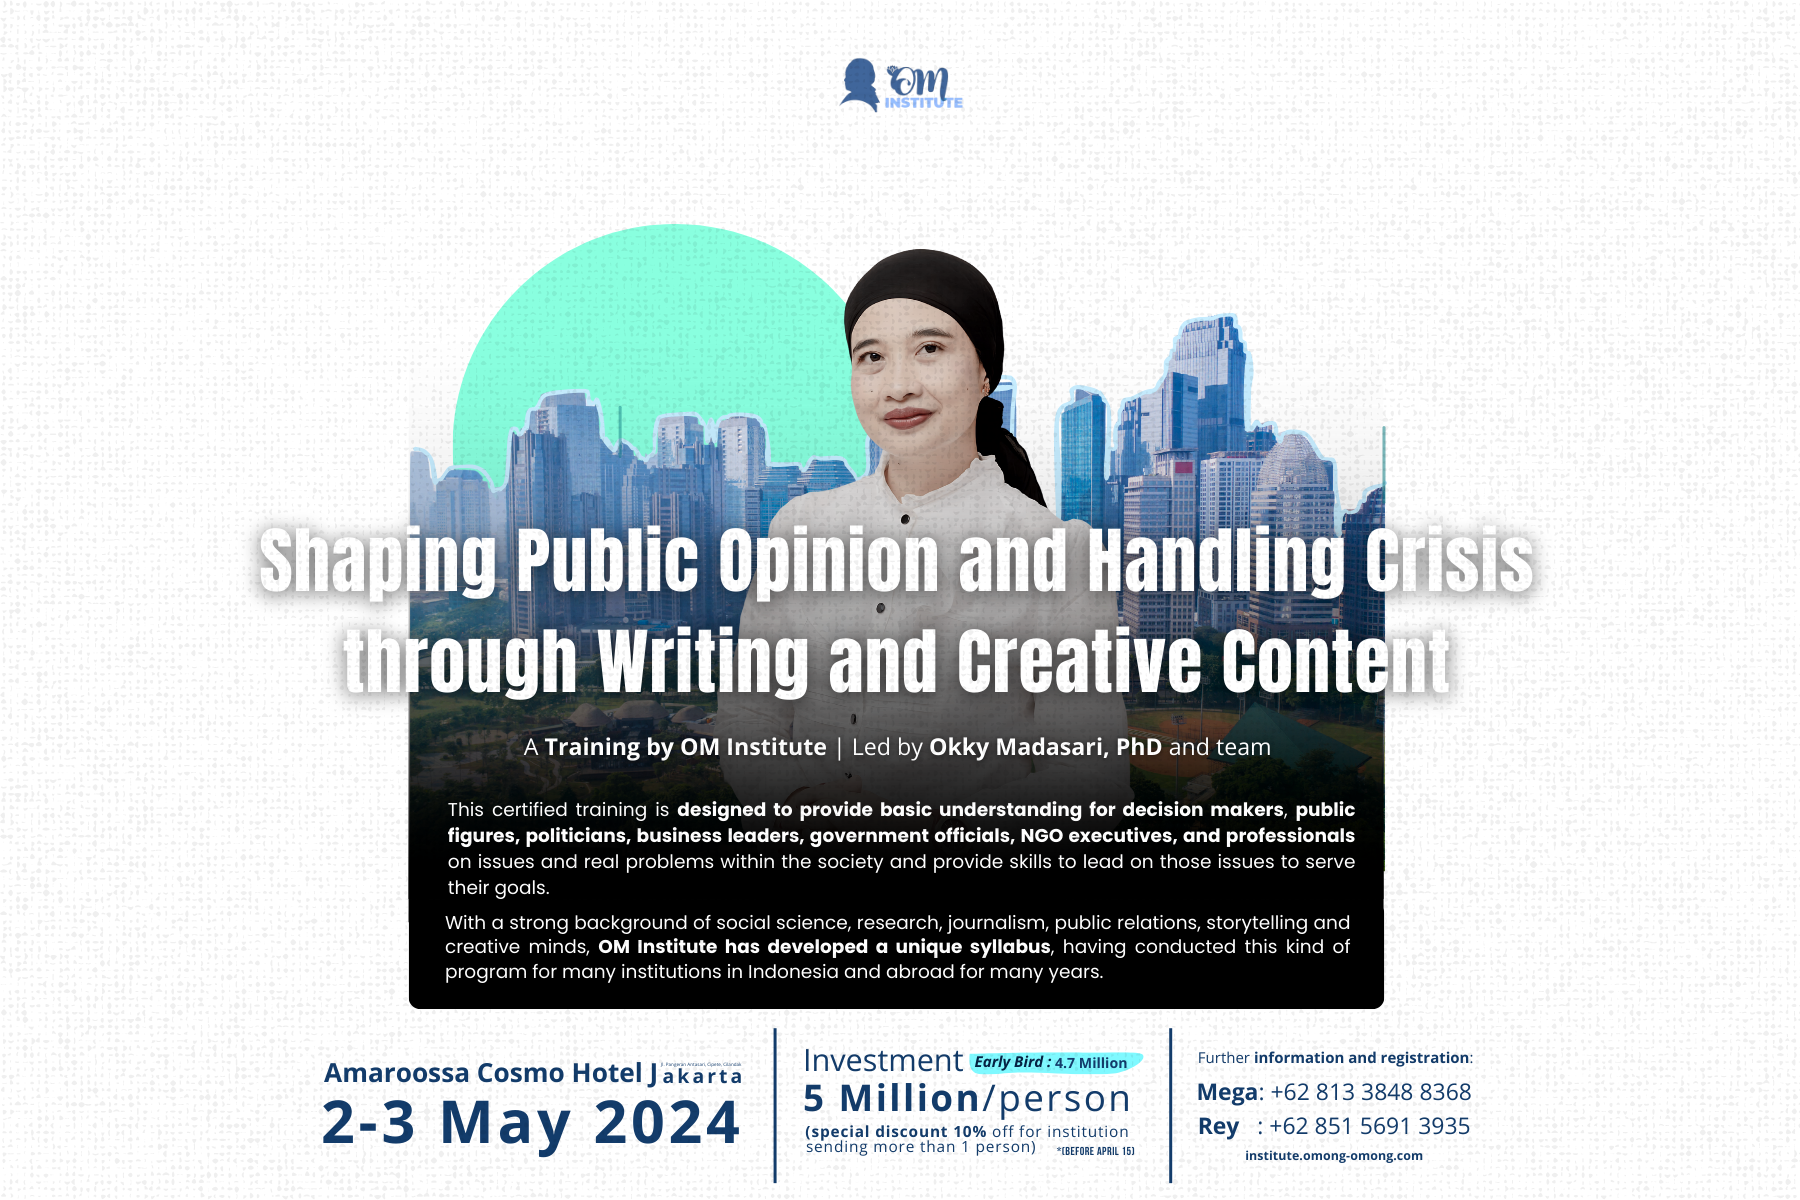 Shaping Public Opinion and Handling Crisis through Writing and Creative Content